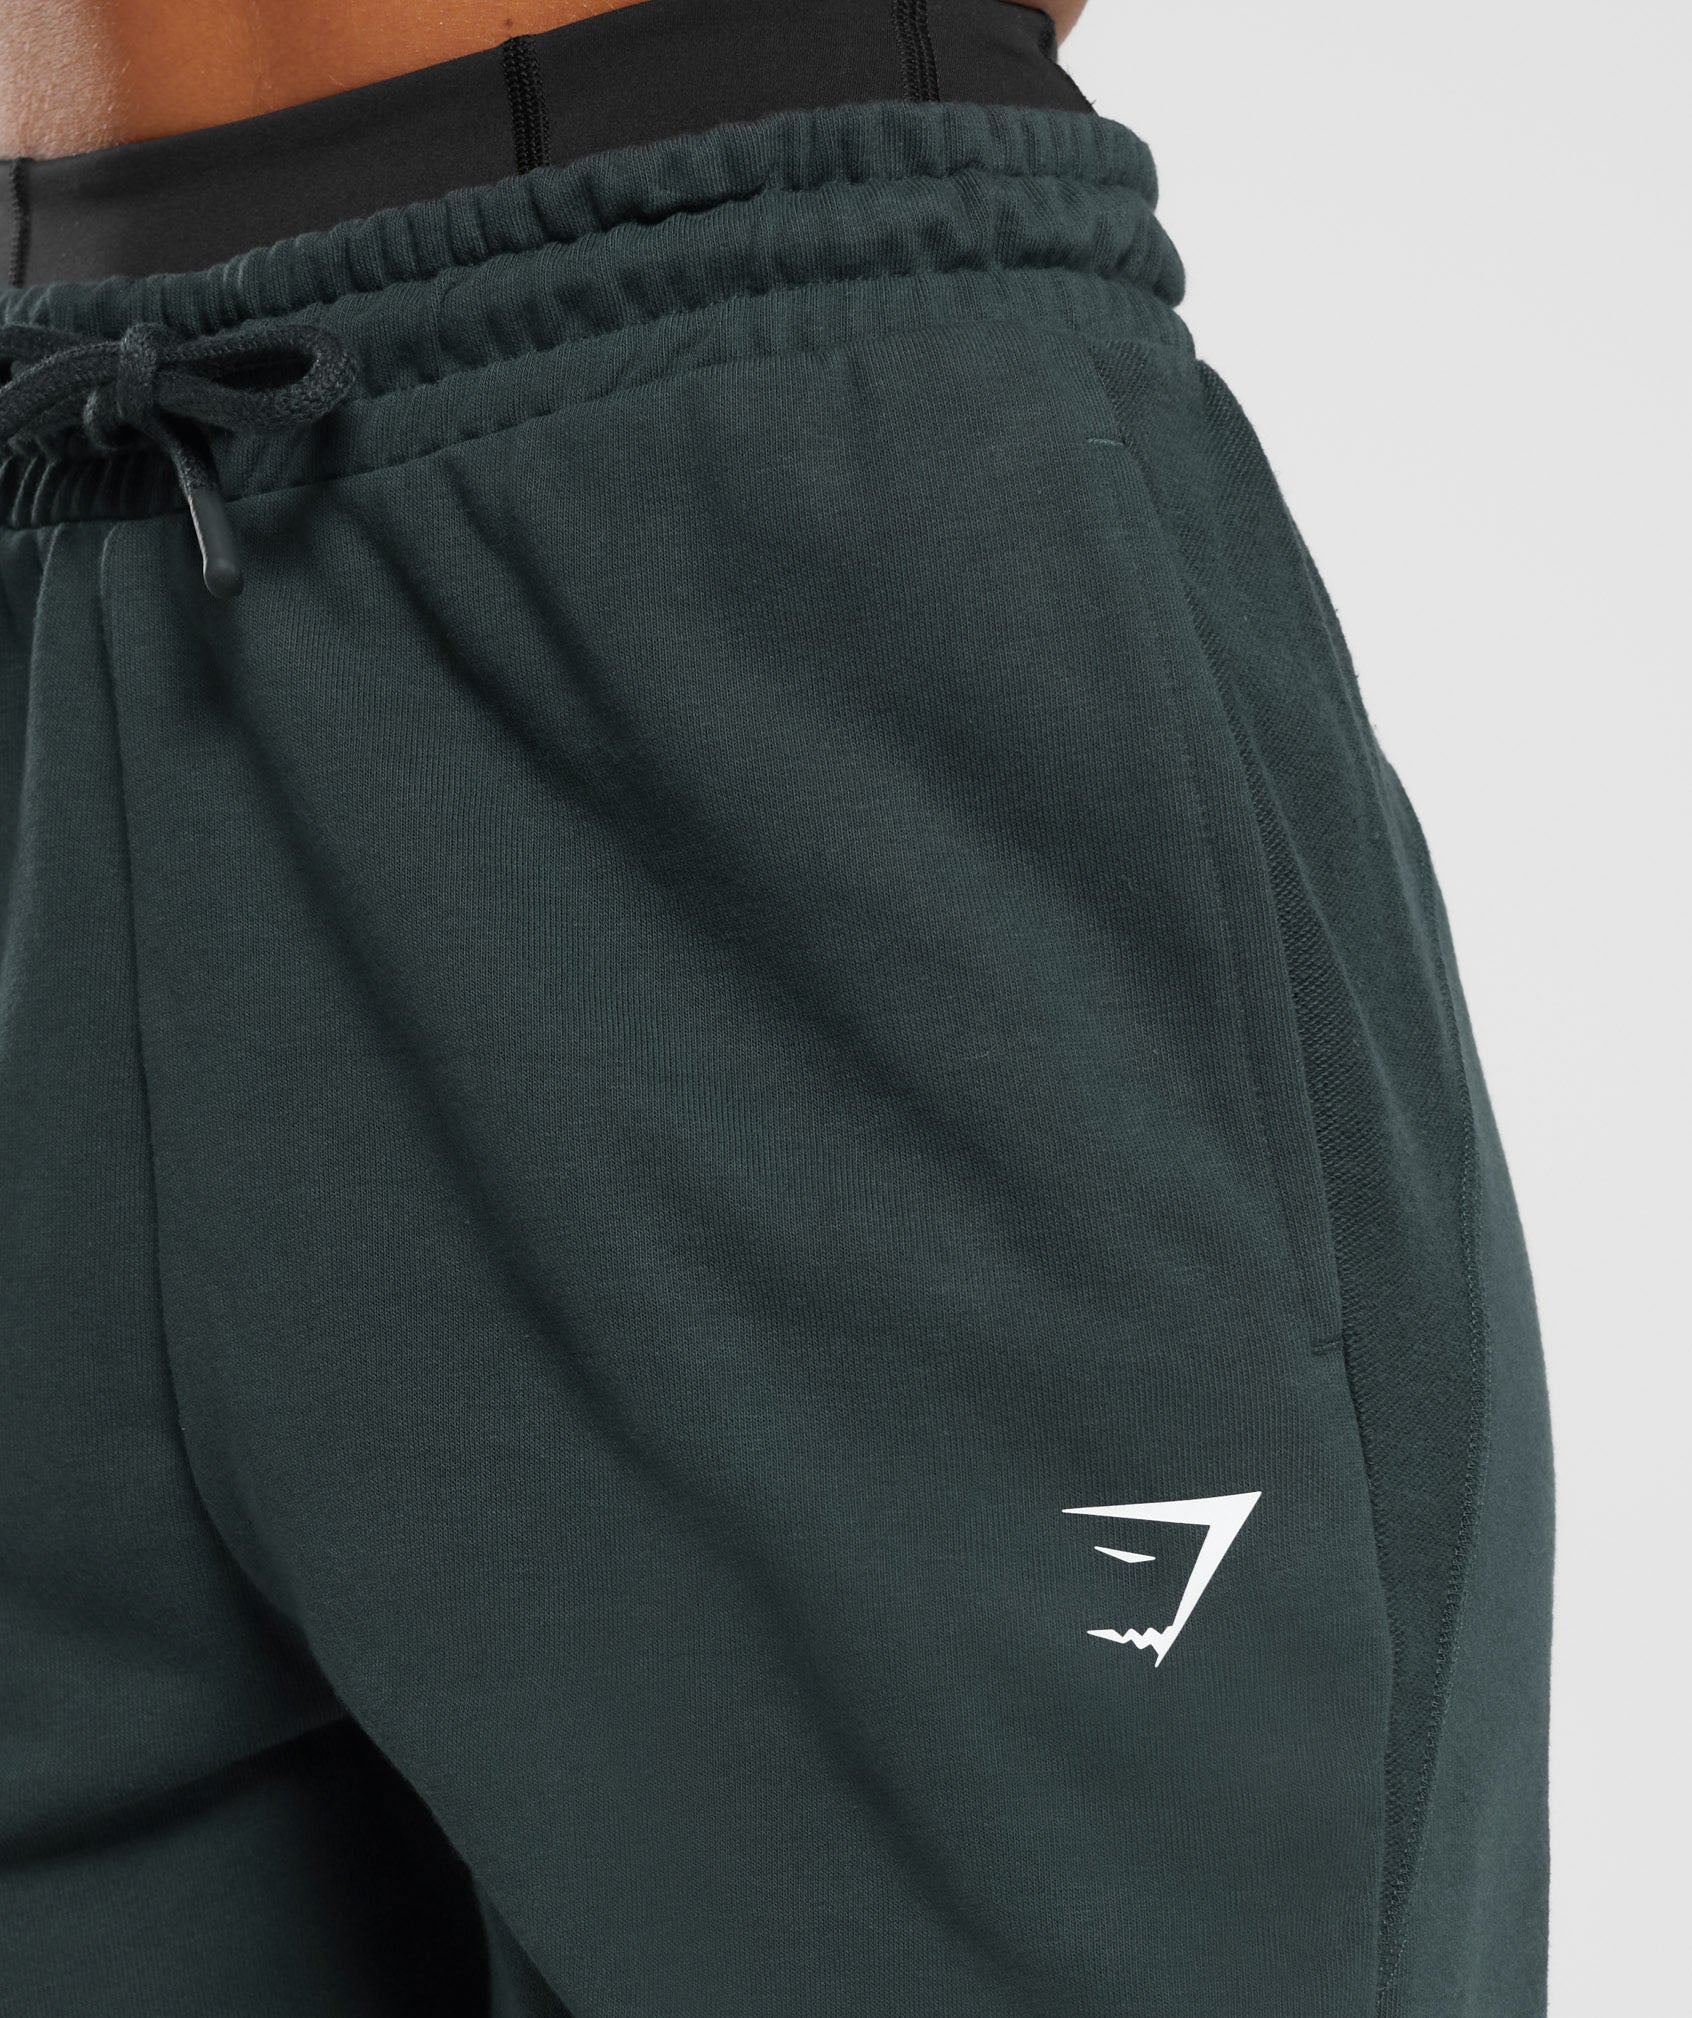 GS Power Joggers in Teal - view 5